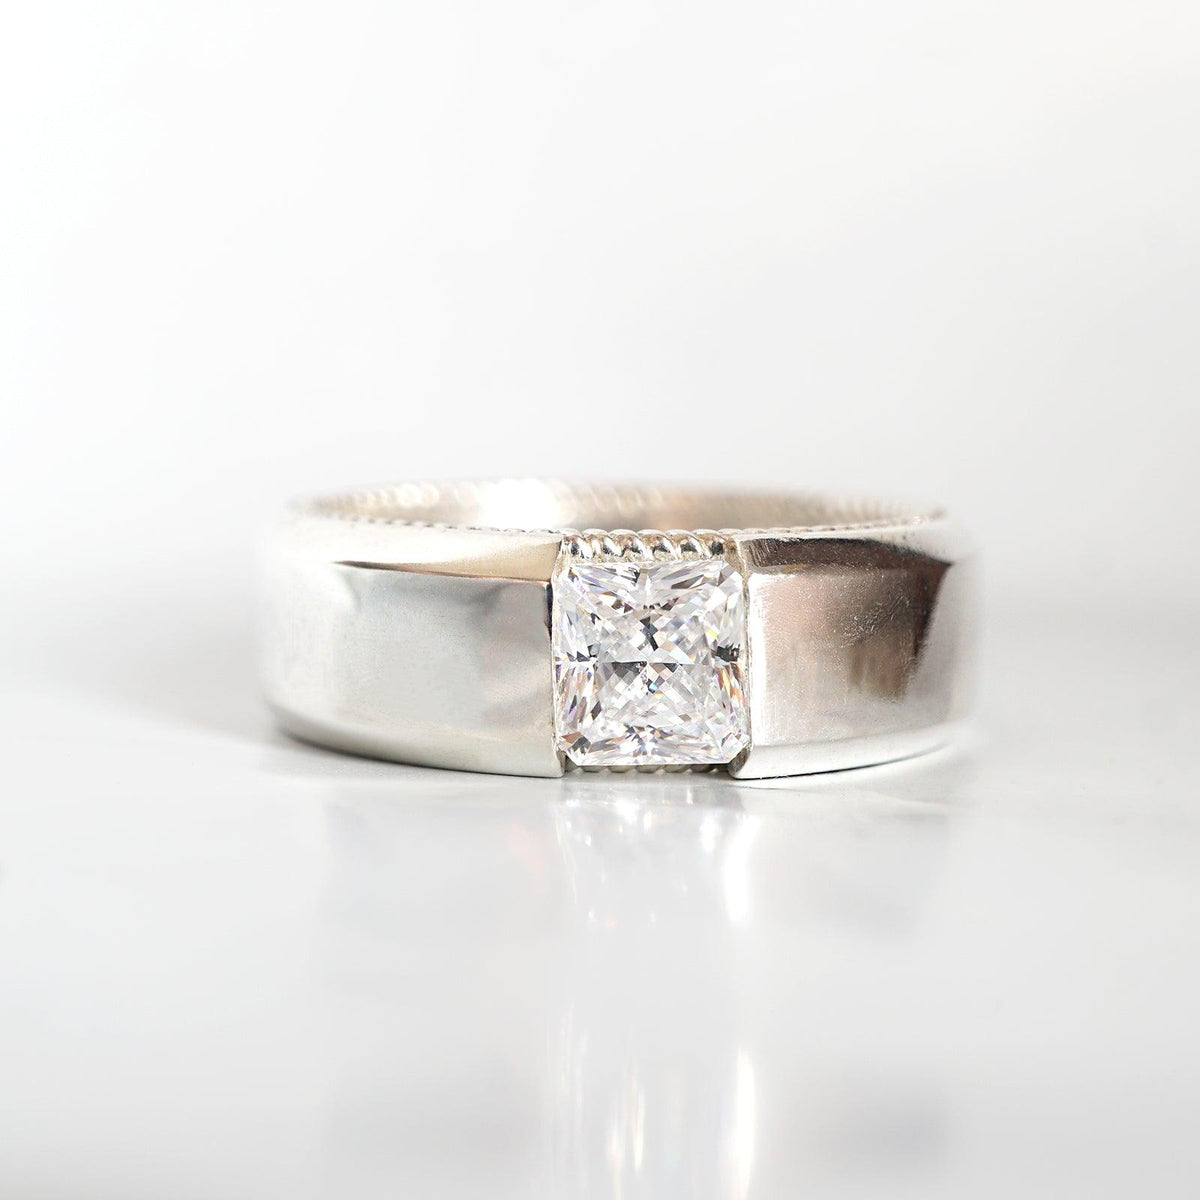 One Of A Kind: Diamond Bevel Ring in 14K Gold, 0.99ct - Tippy Taste Jewelry